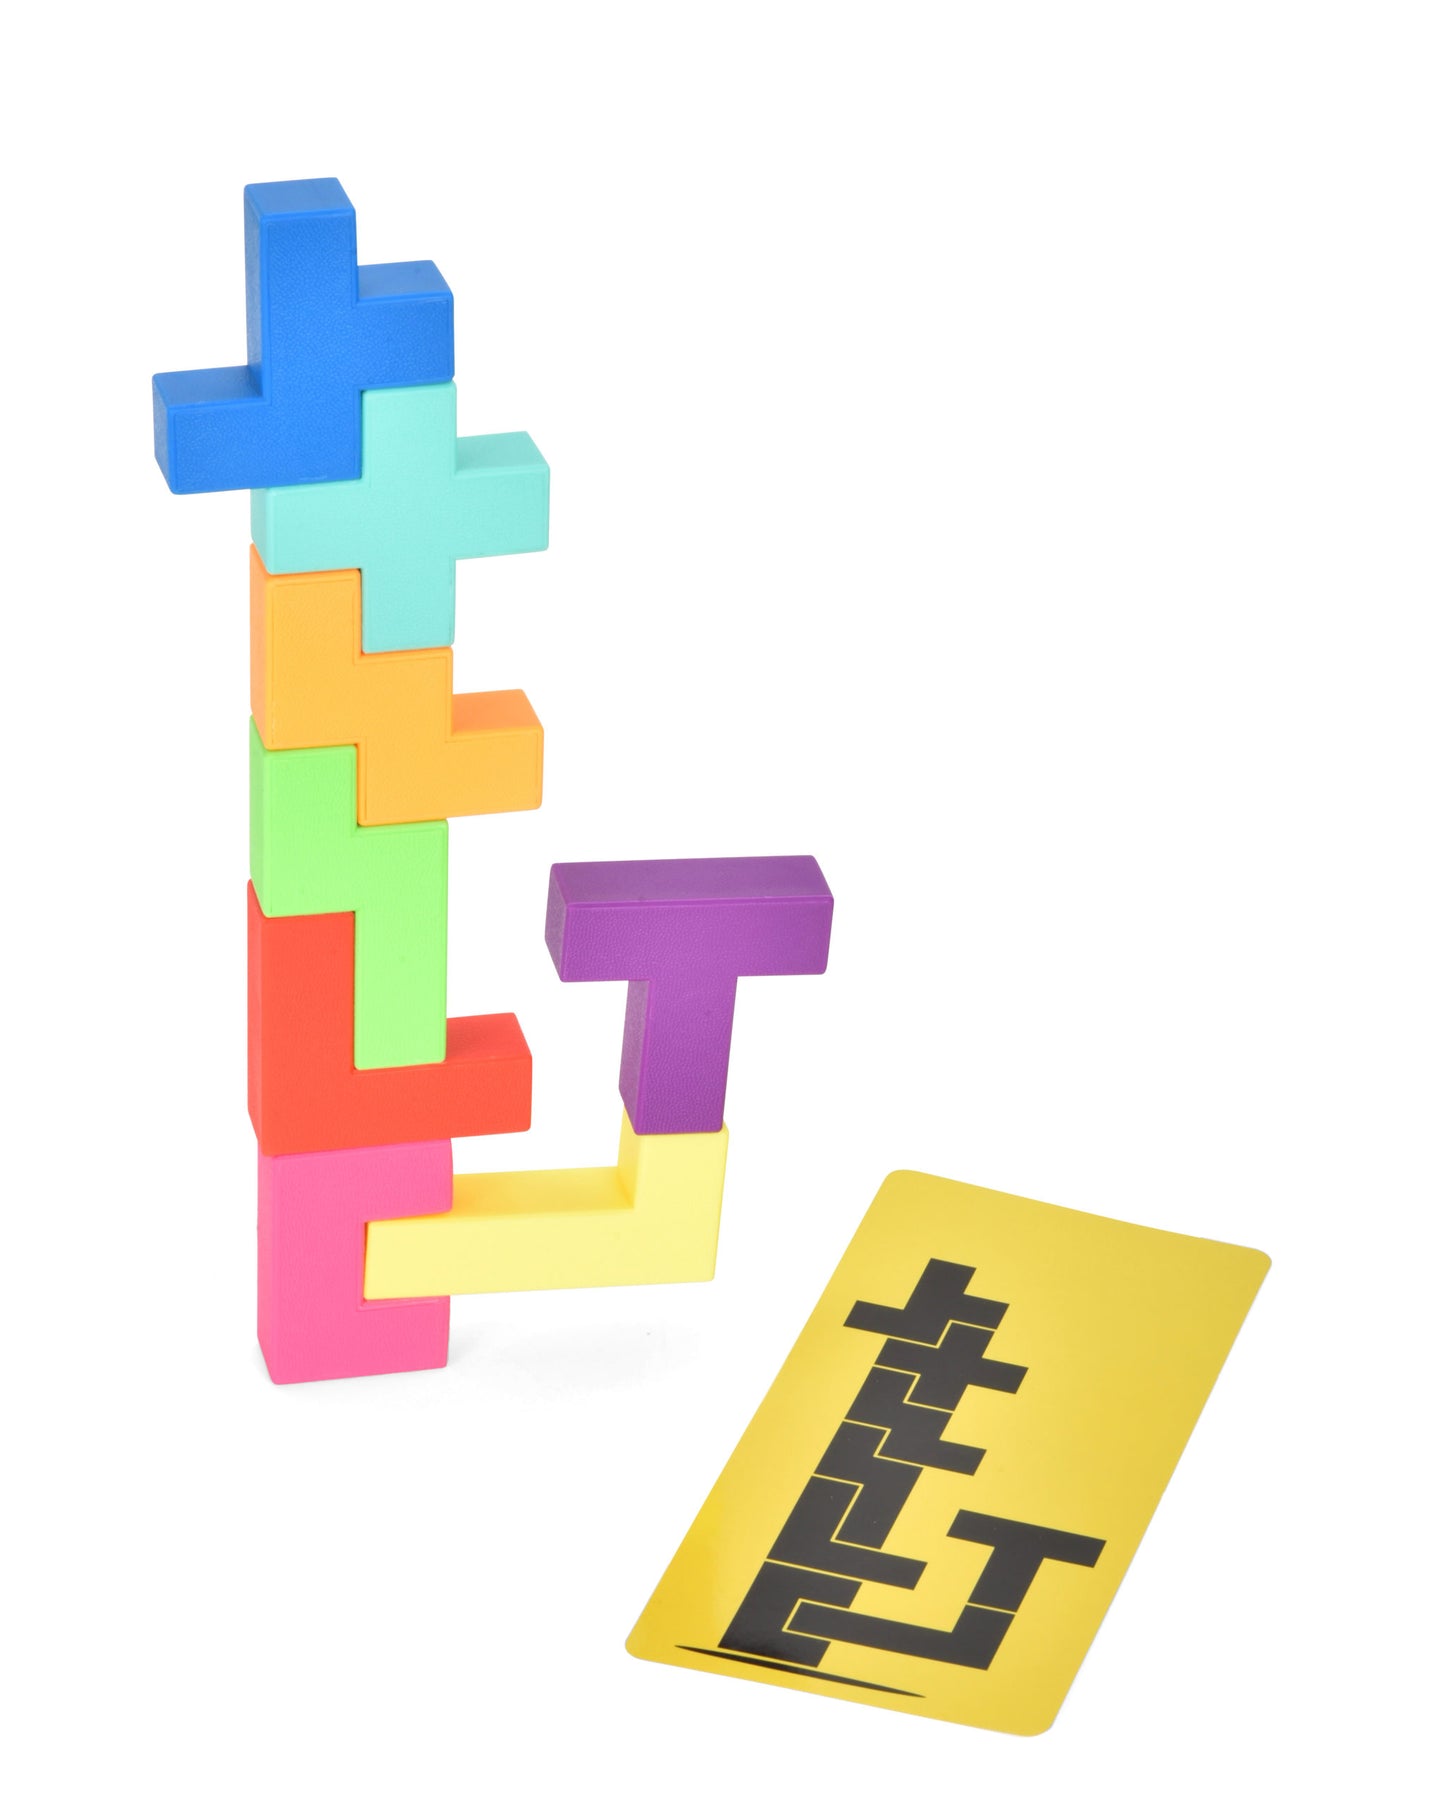 stack of blocks and yellow card on white background.